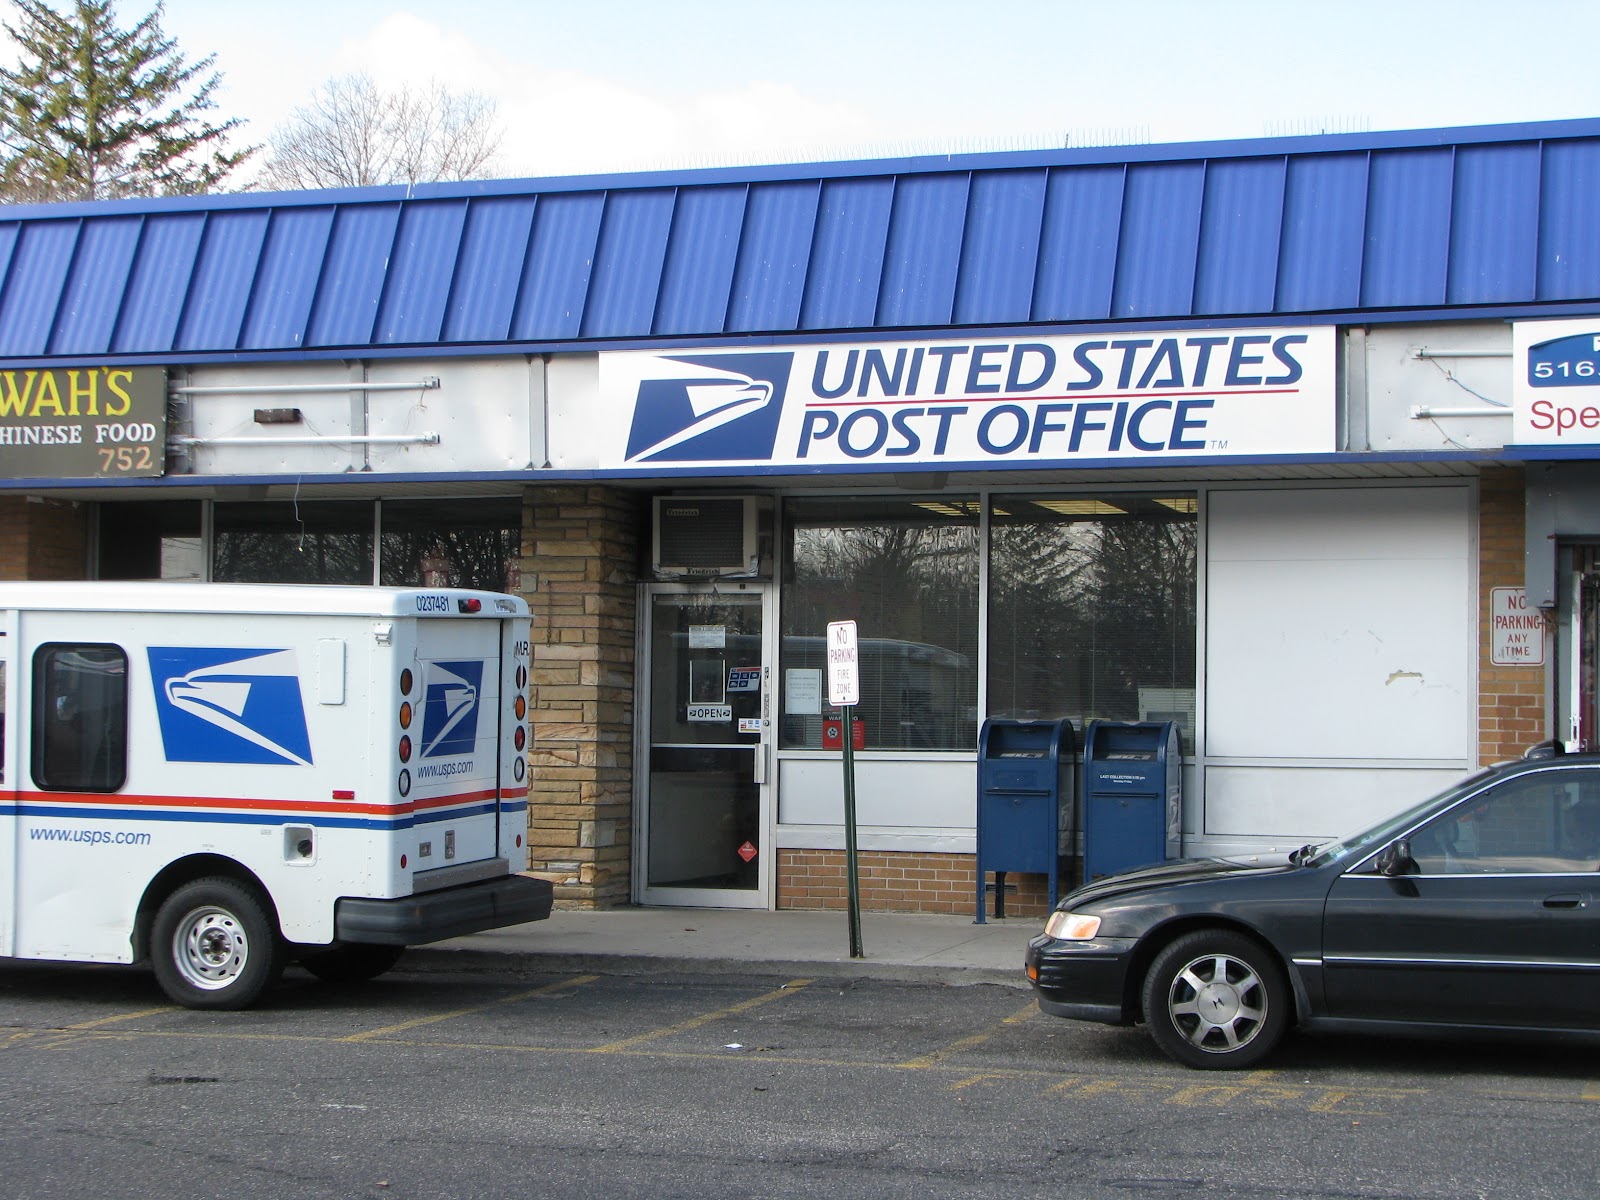 of the ~85 post offices in